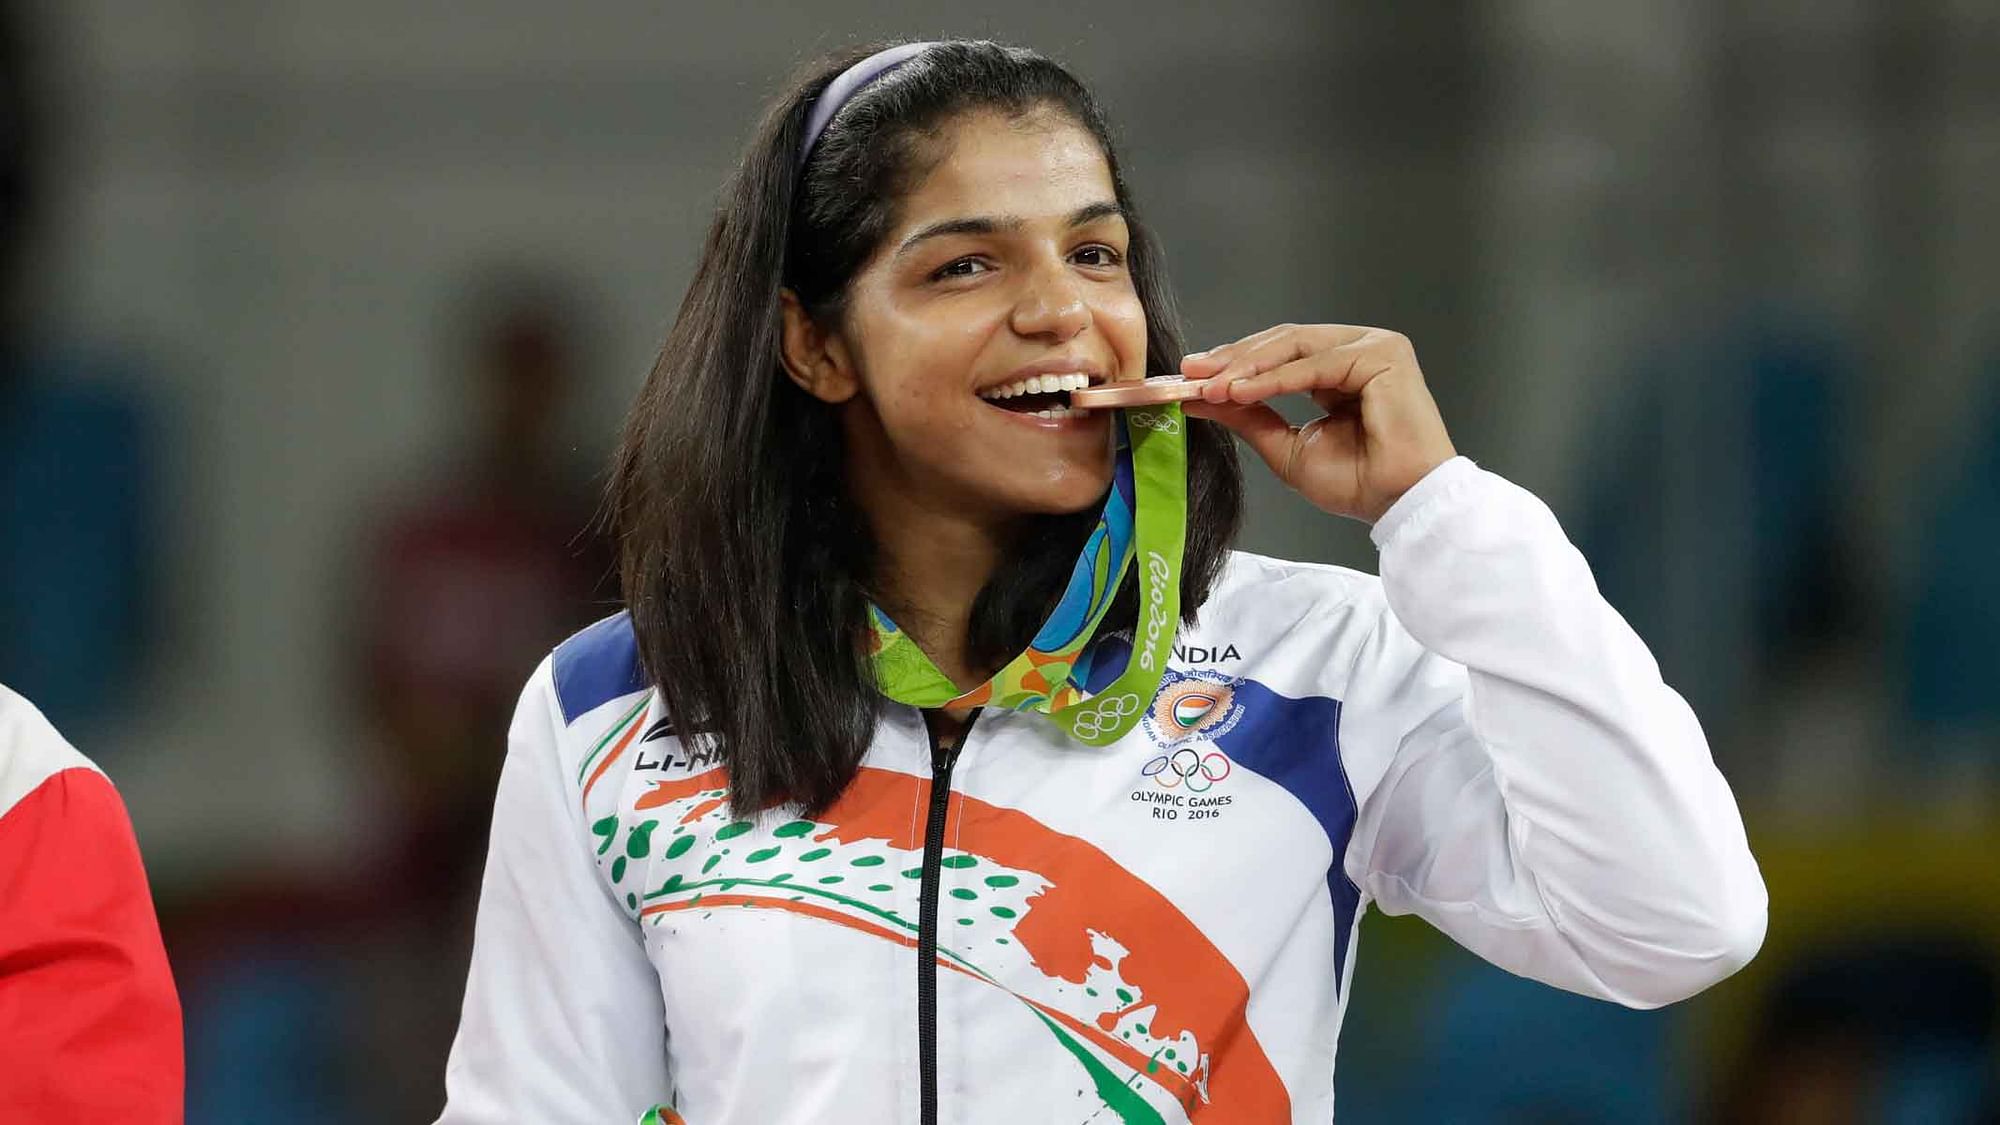 Bringing home India’s 25th Olympic medal and first women’s wrestling medal, Sakshi ended the country’s painful wait for a medal. (Photo: AP)